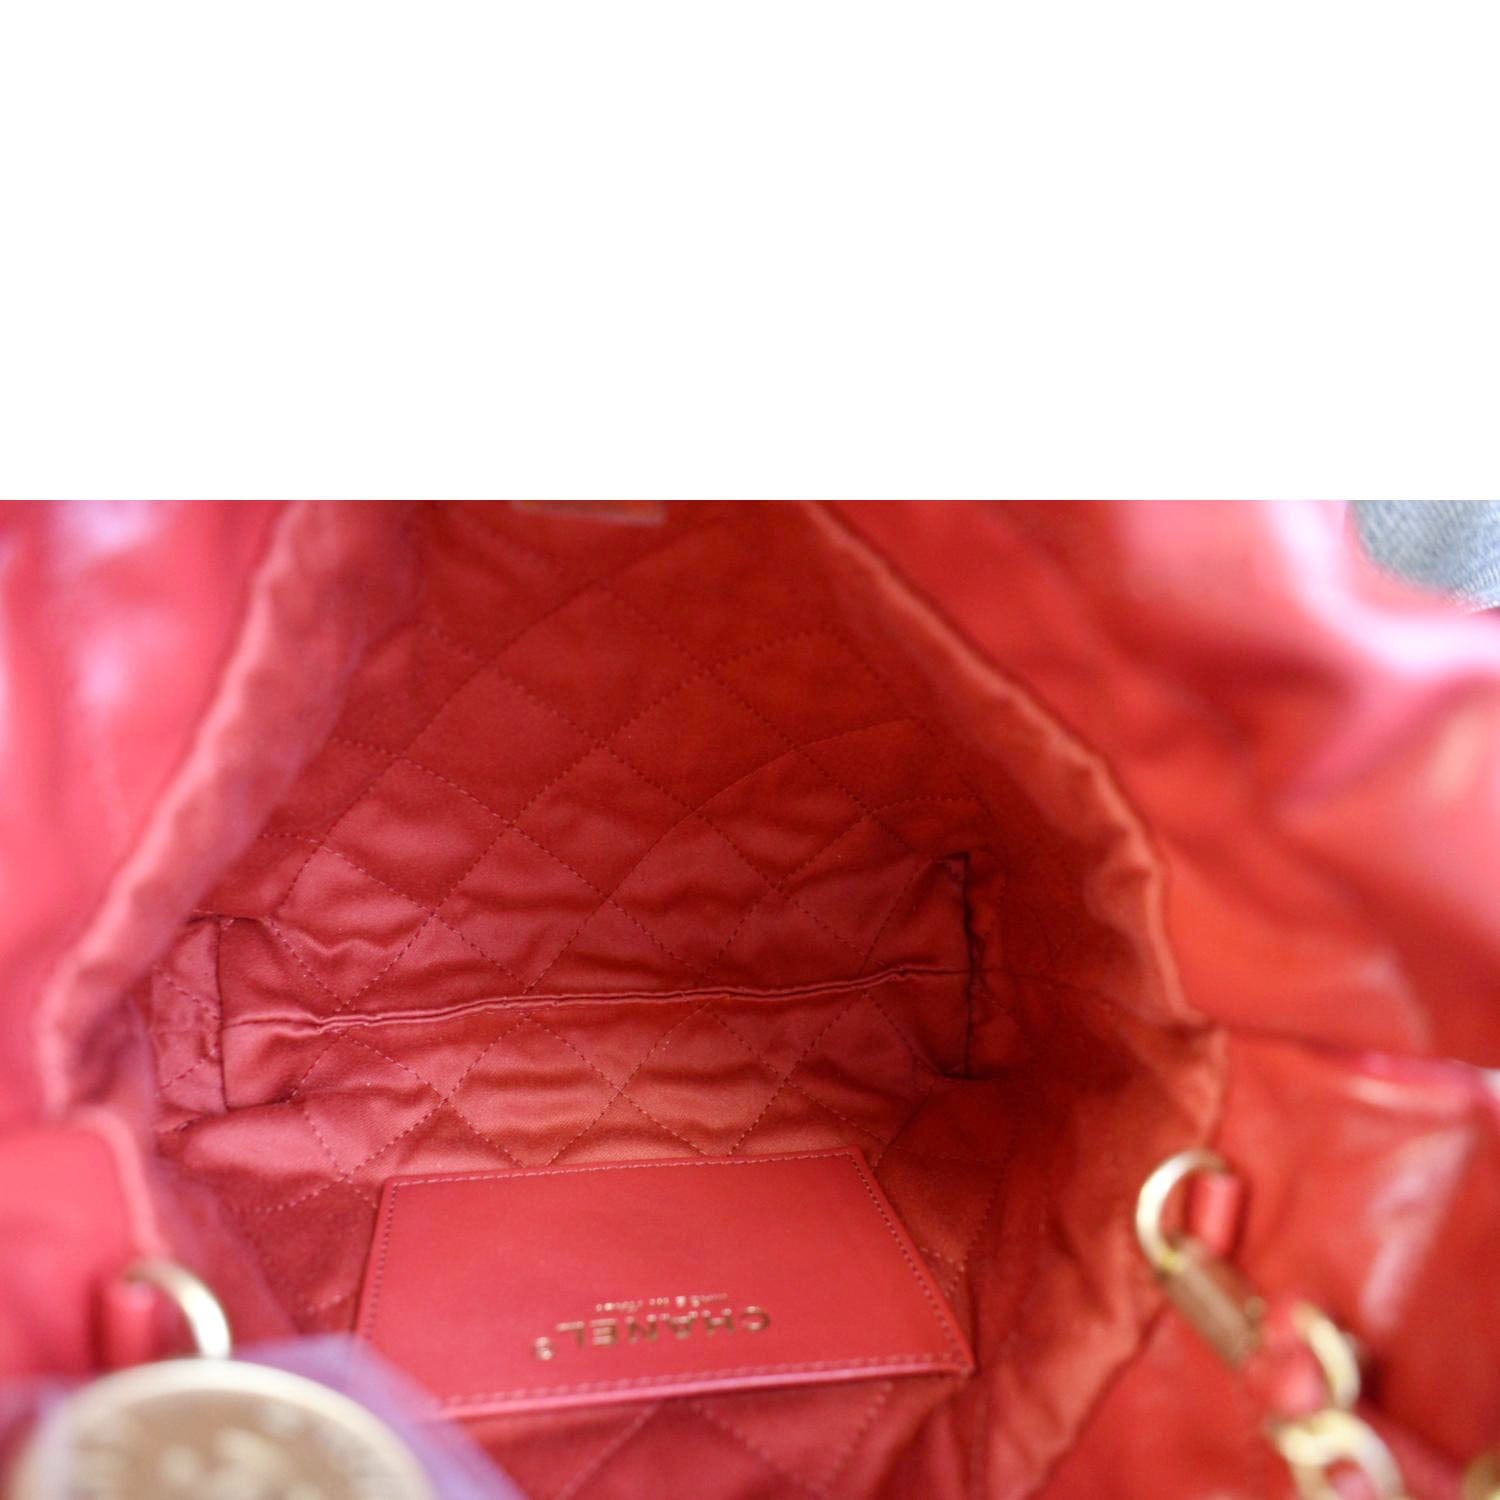 CHANEL 22 Mini Chain Shiny Calfskin Leather Shoulder Bag Red